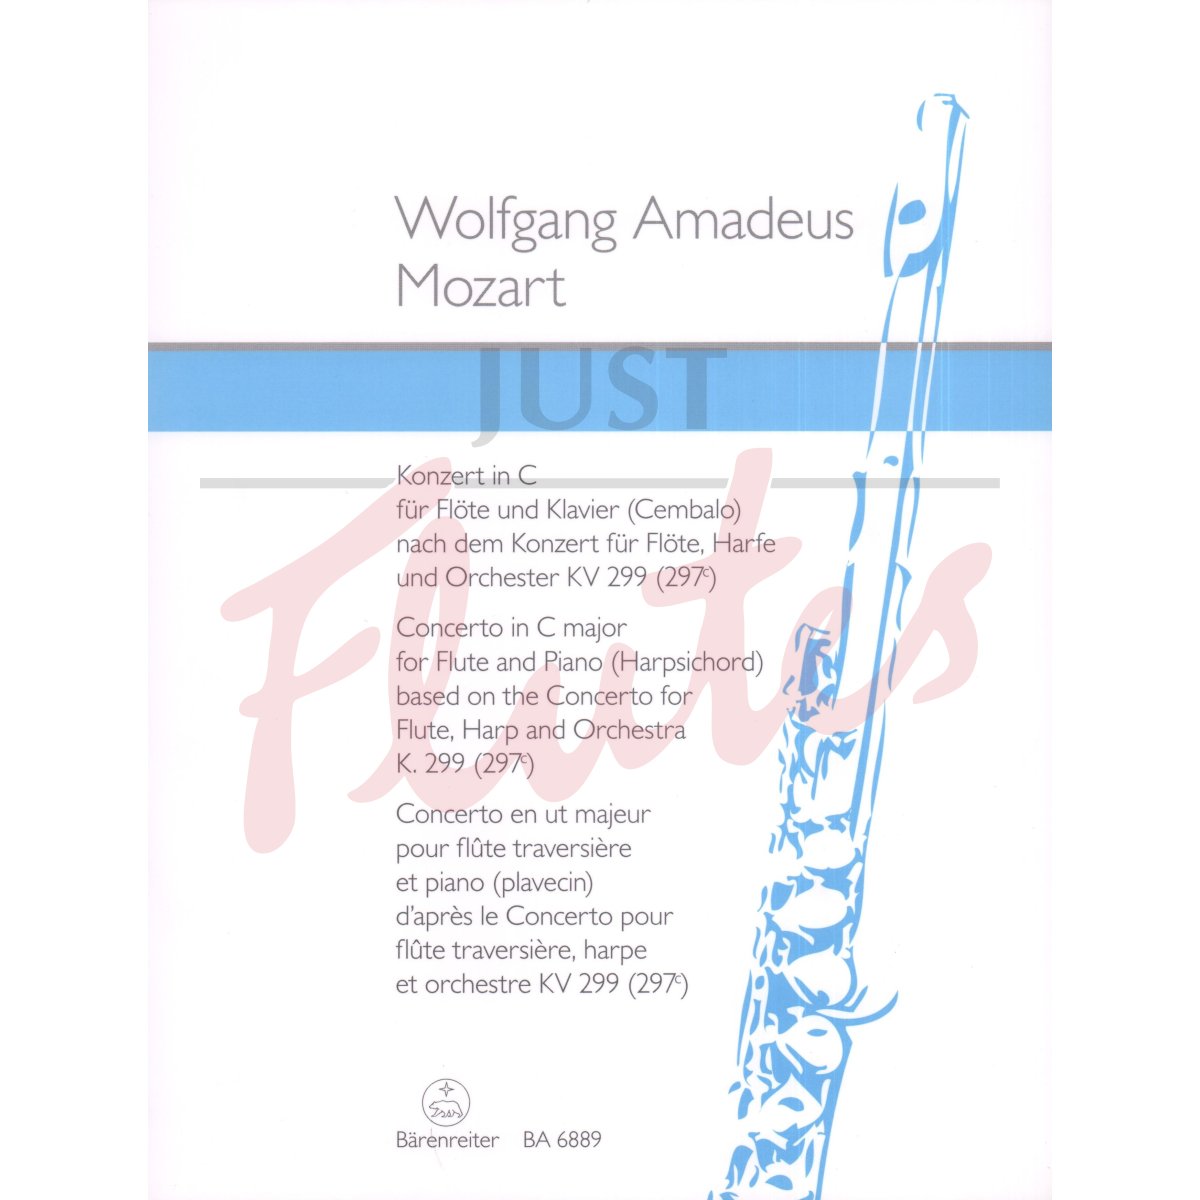 Flute and Harp Concerto in C major arranged for Flute and Piano